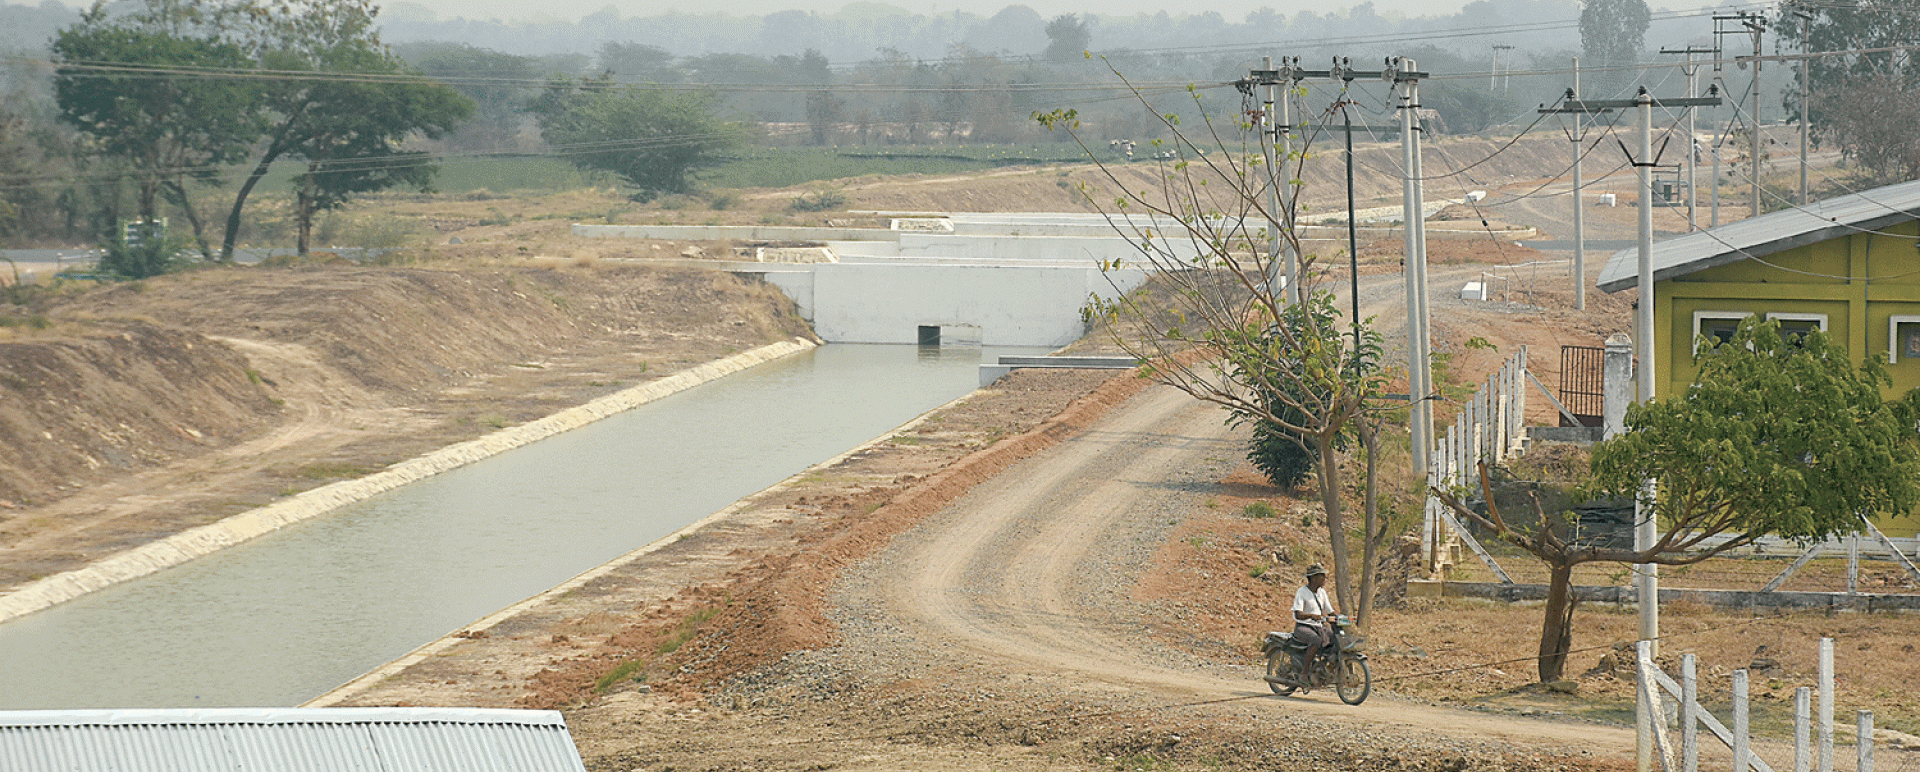 Pyawt Ywar River Pumping Project site’s station 